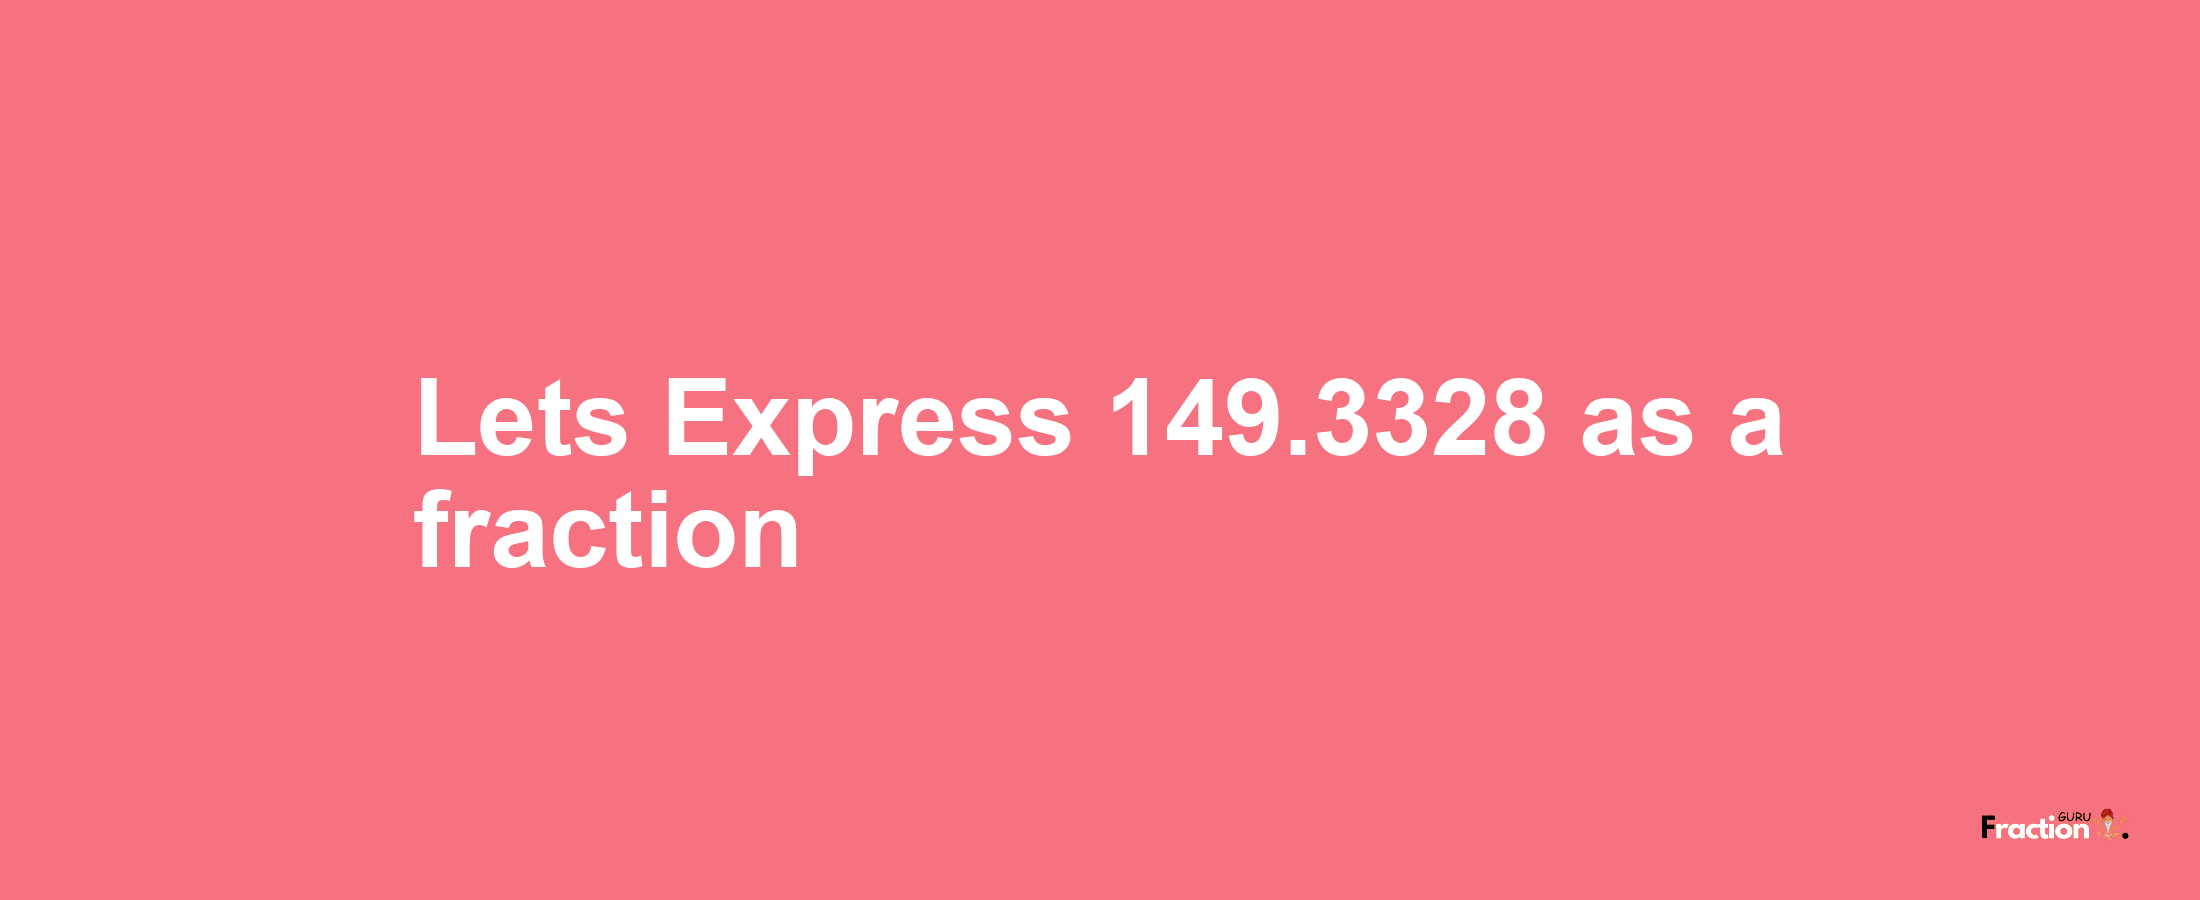 Lets Express 149.3328 as afraction